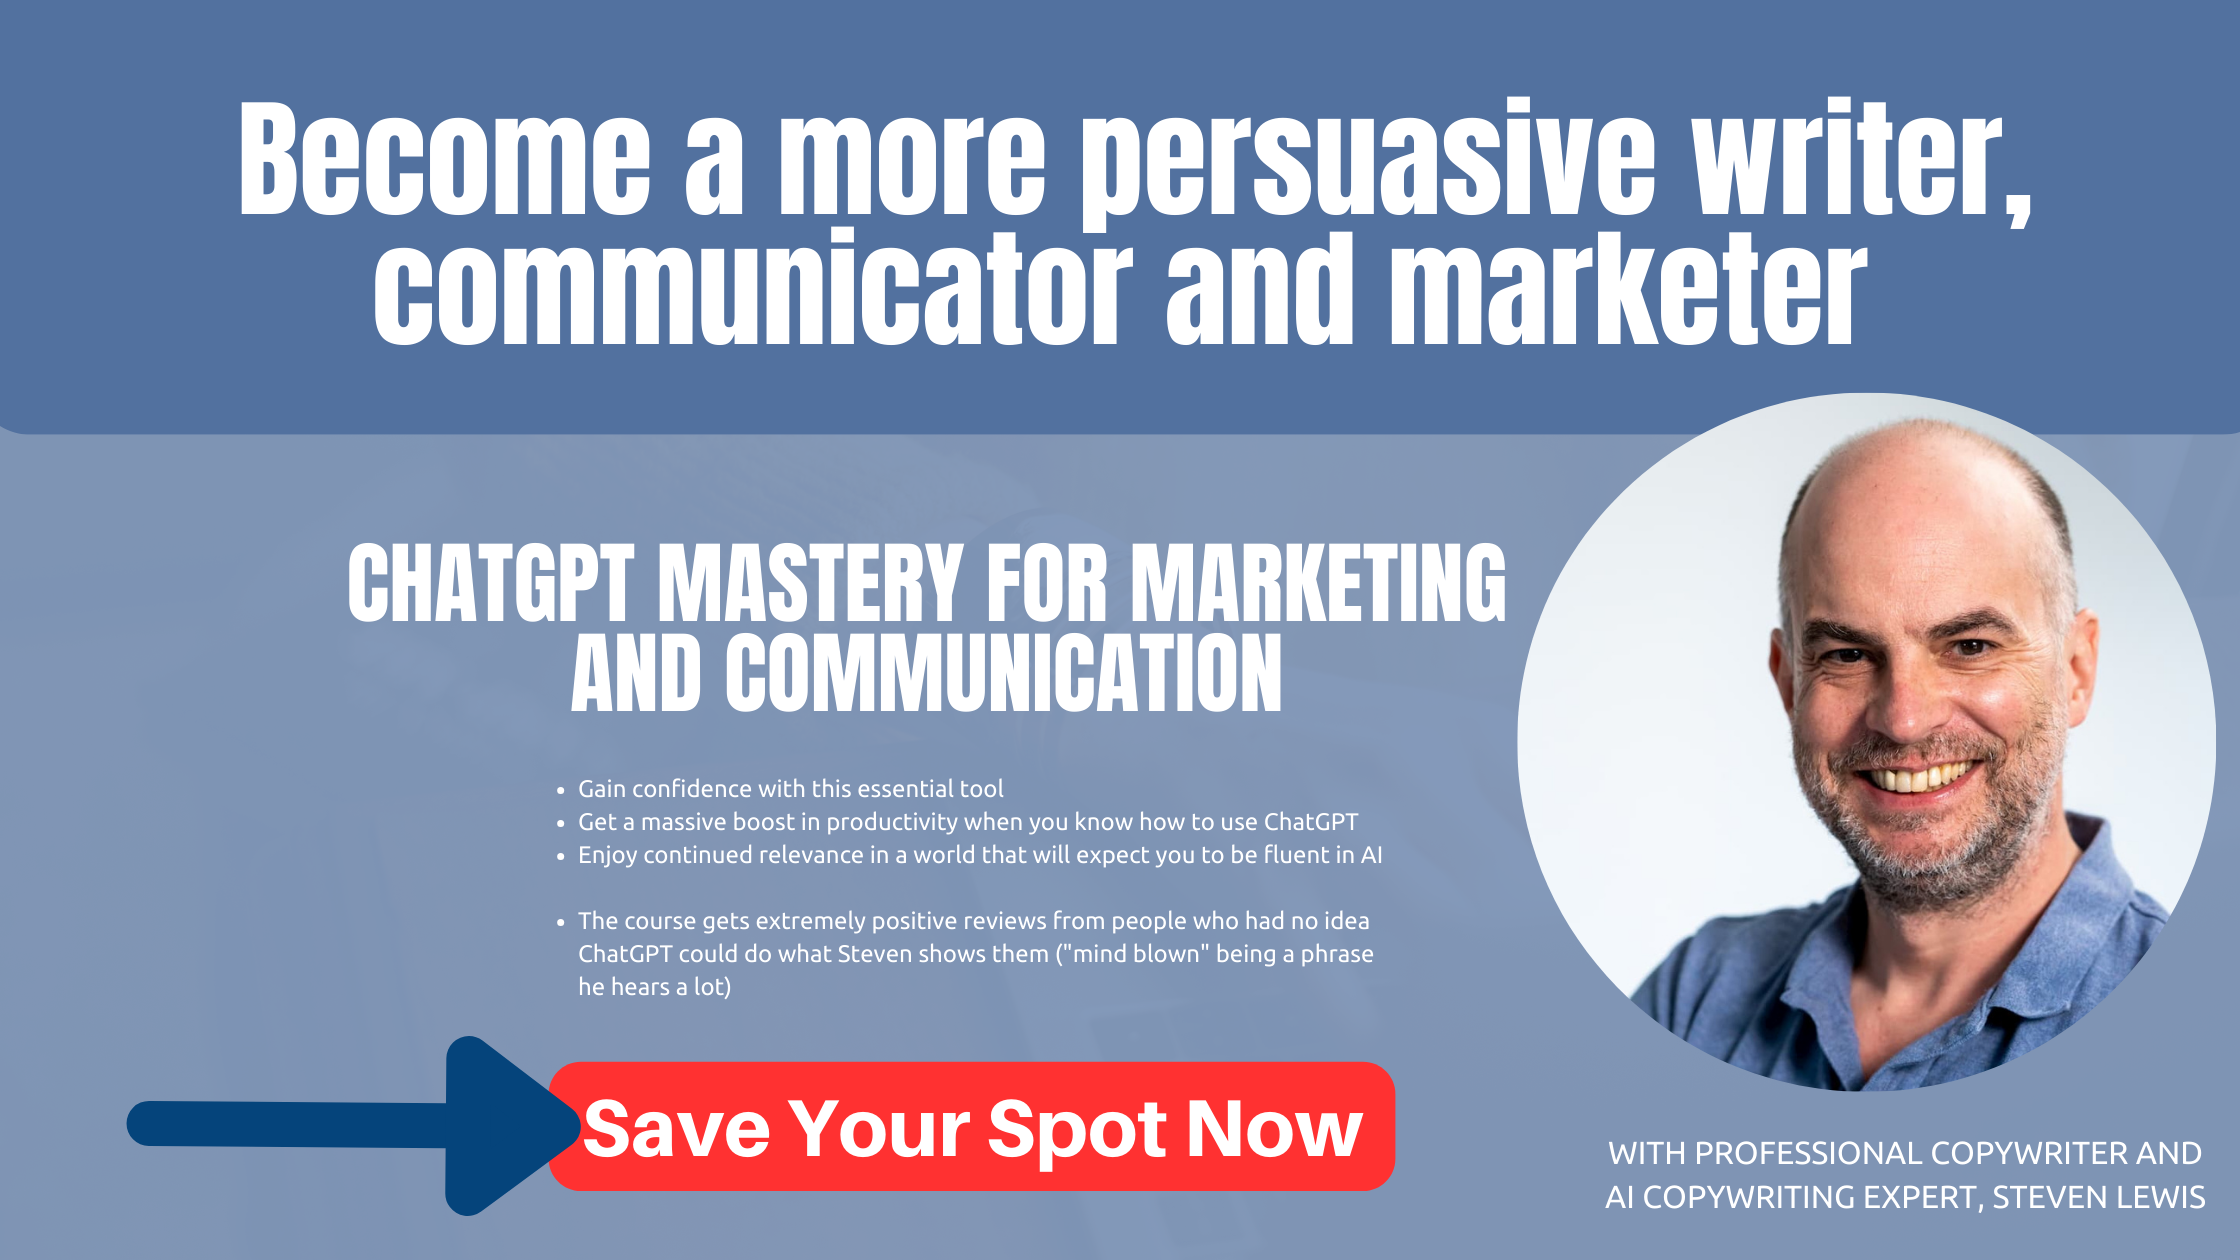 Smiling man in a blue shirt on a light background.  Man is professional copywriter and AI copywriting expert, Steven Lewis.  Text says "become a more persuasive writer, communicator and marketer.  ChaptGPT mastery for marketing and communications.